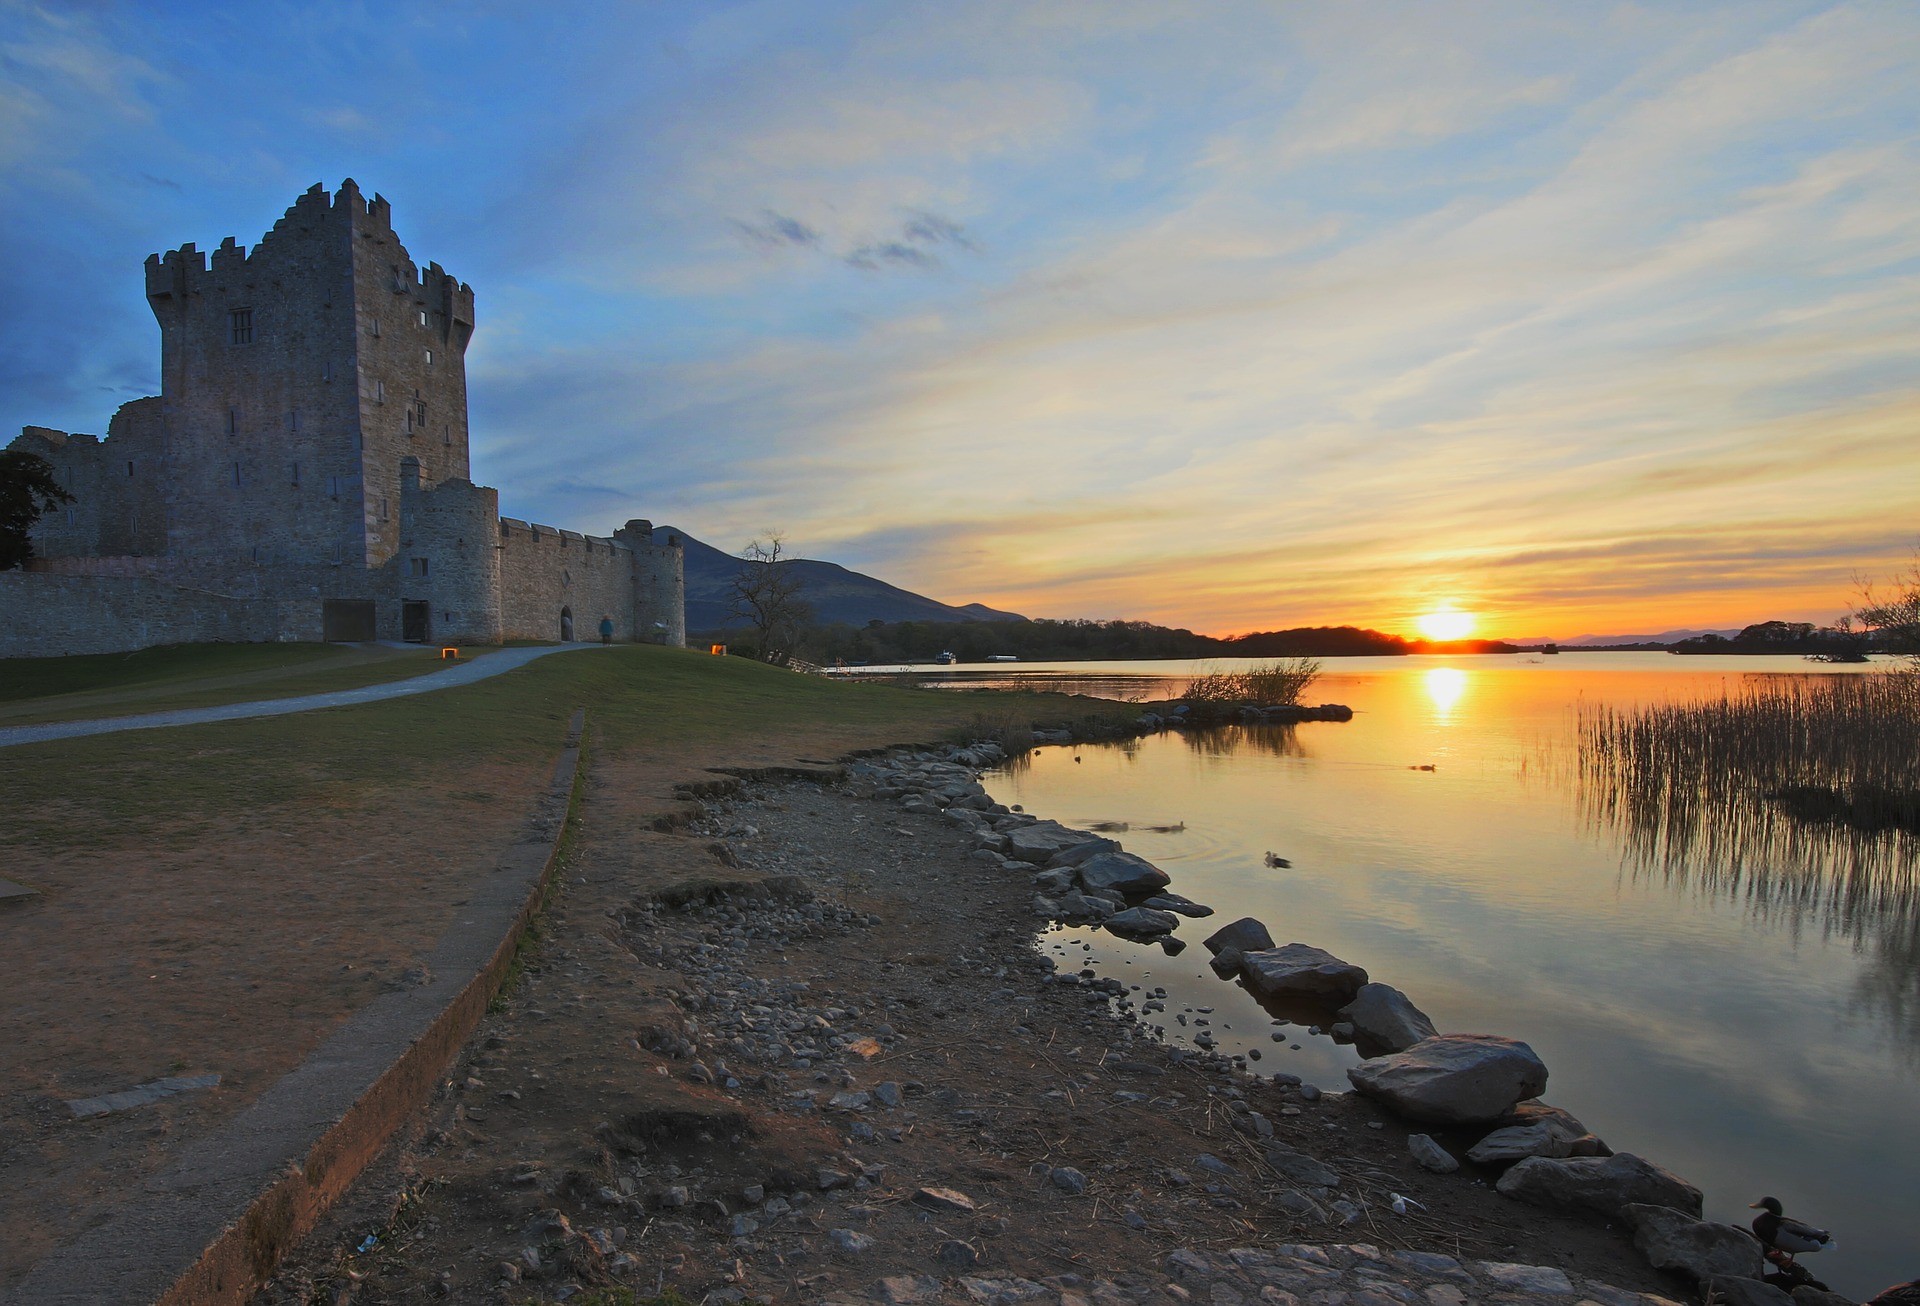 Ross Castle in Killarney is a 15th century tower house that makes you feel like you've stepped back in time.